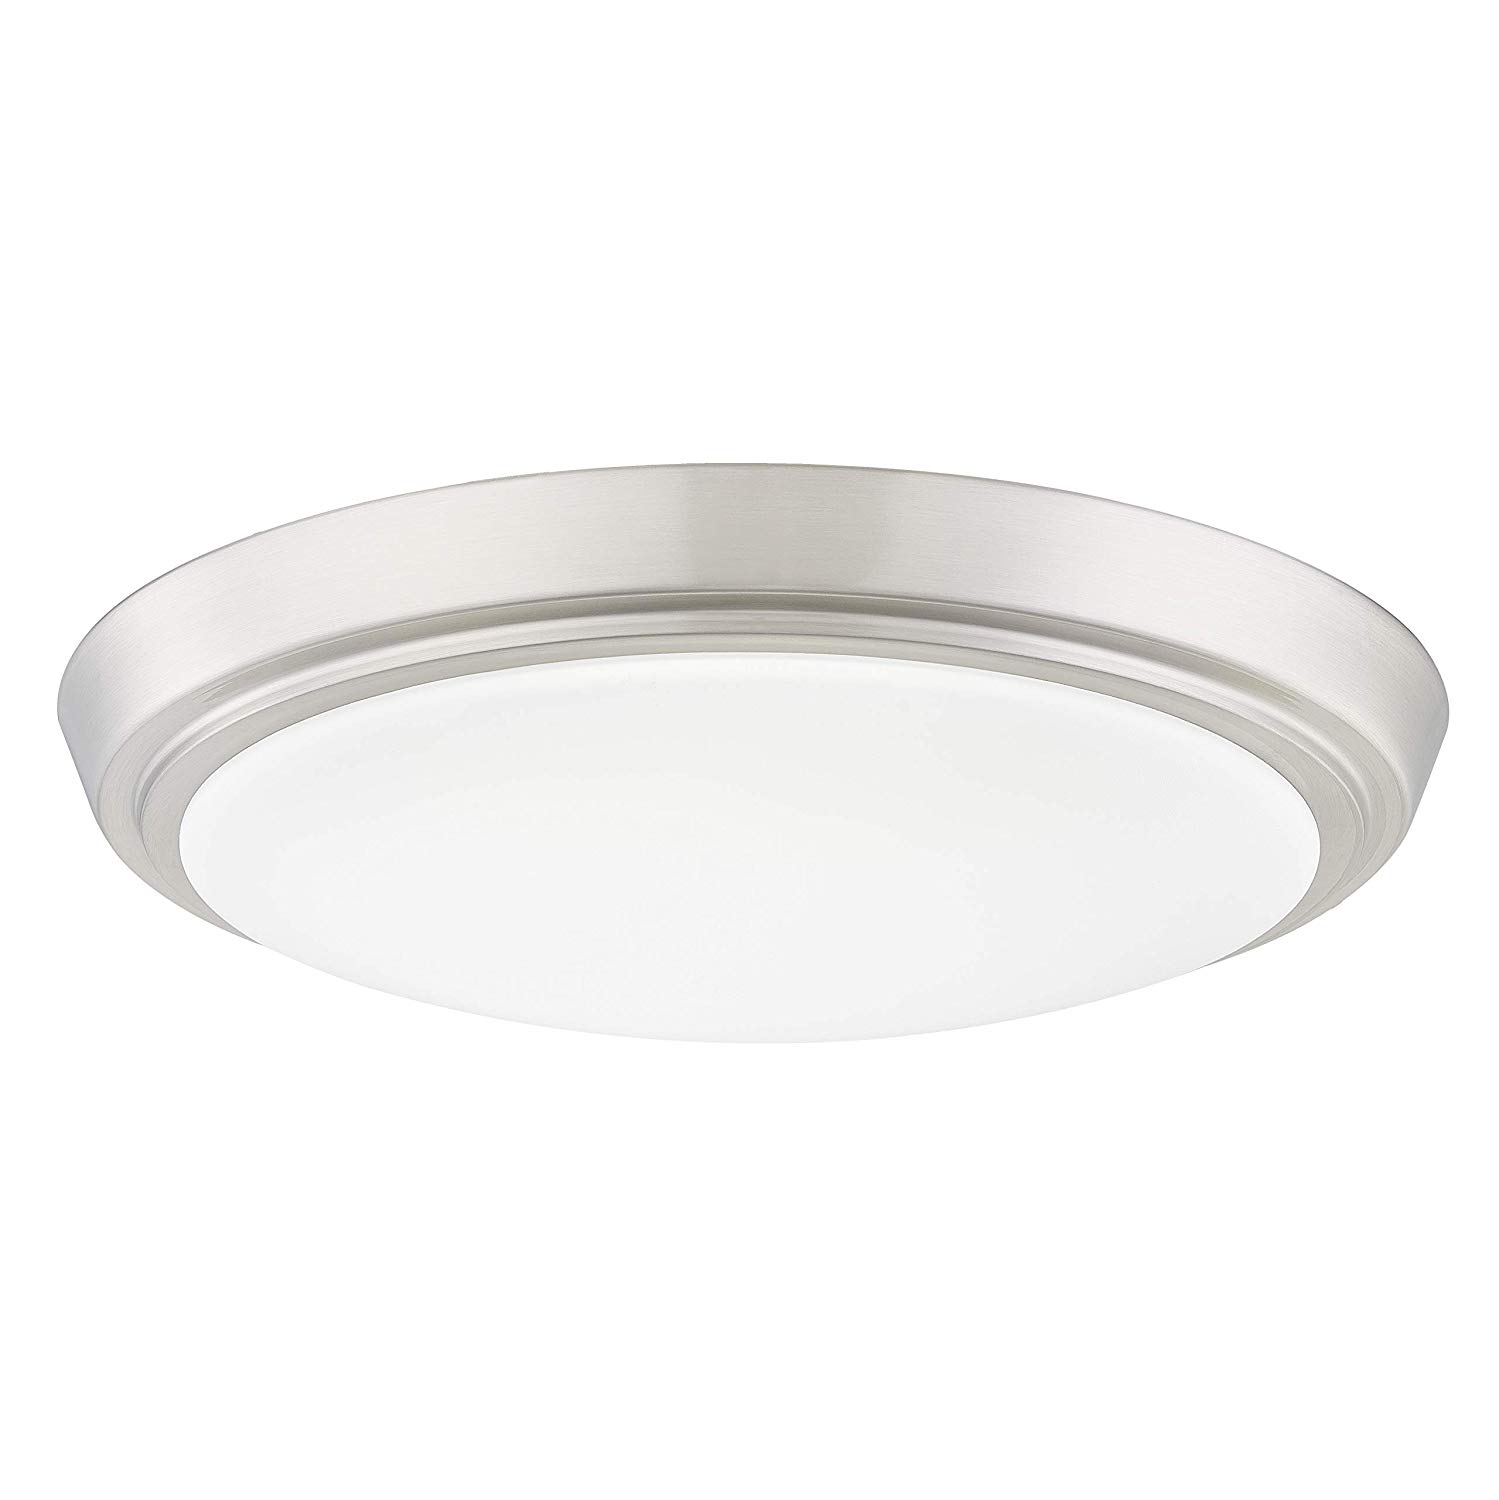 GRUENLICH LED Flush Mount Ceiling Lighting Fixture, 13 Inch Dimmable 22W (150W Replacement) 1340 Lumen, Metal Housing with Nickel Finish, ETL and Damp Location Rated 